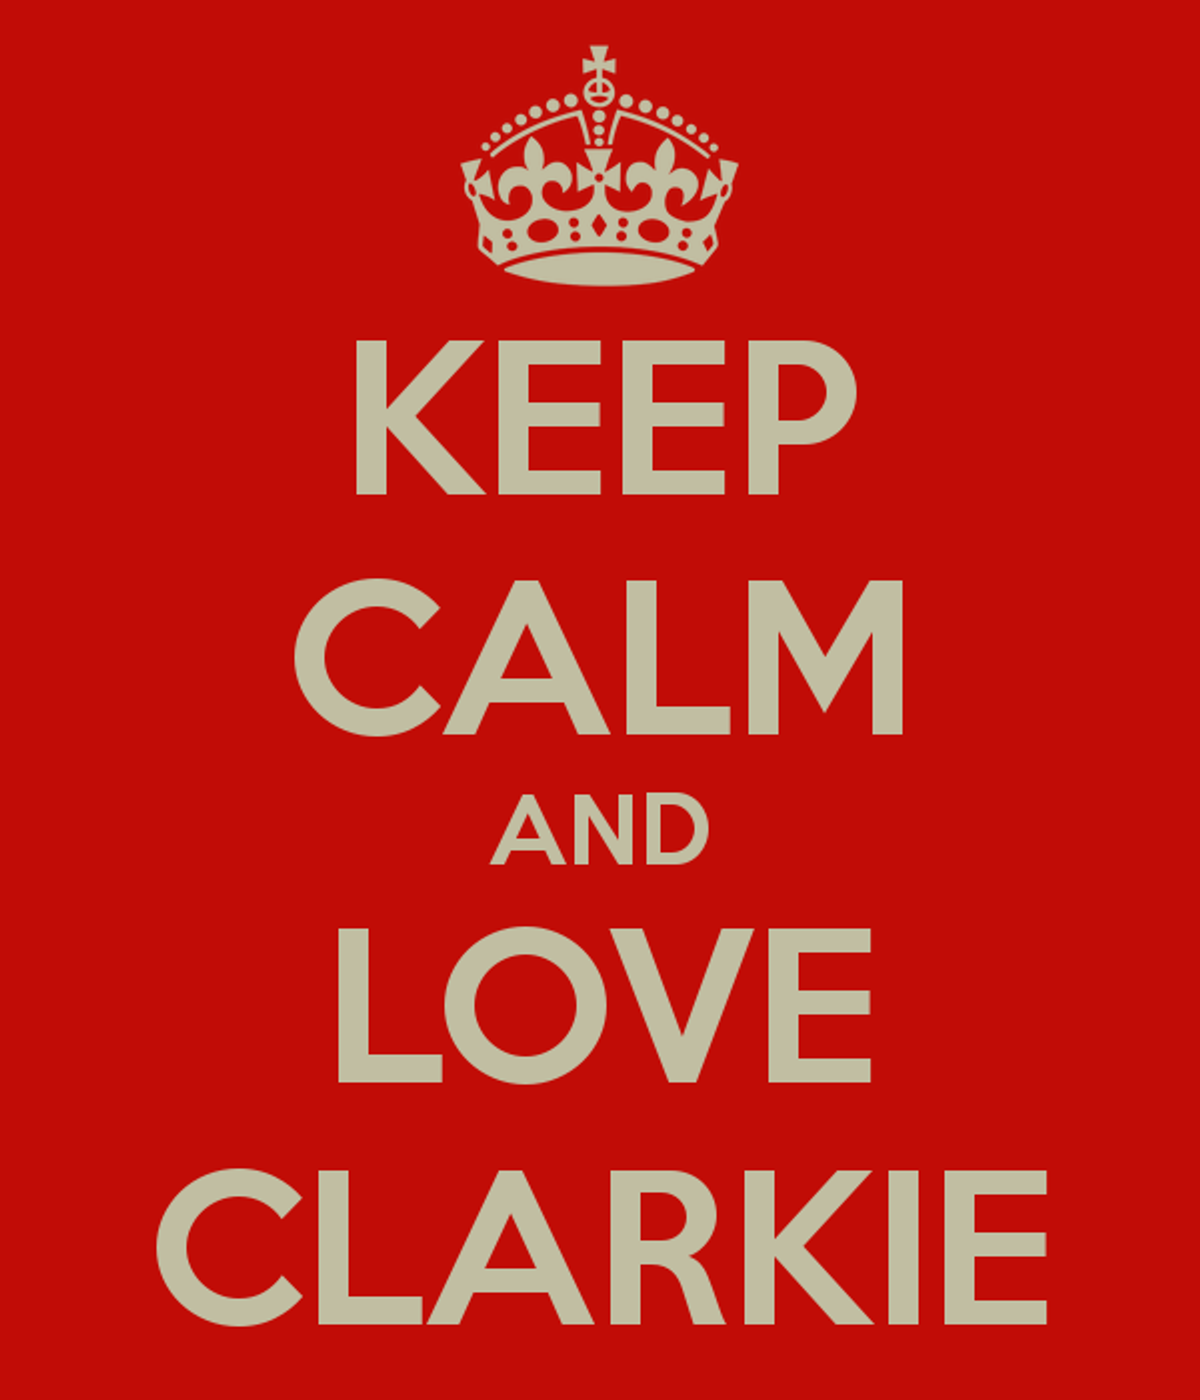 5 Things About Clarkies